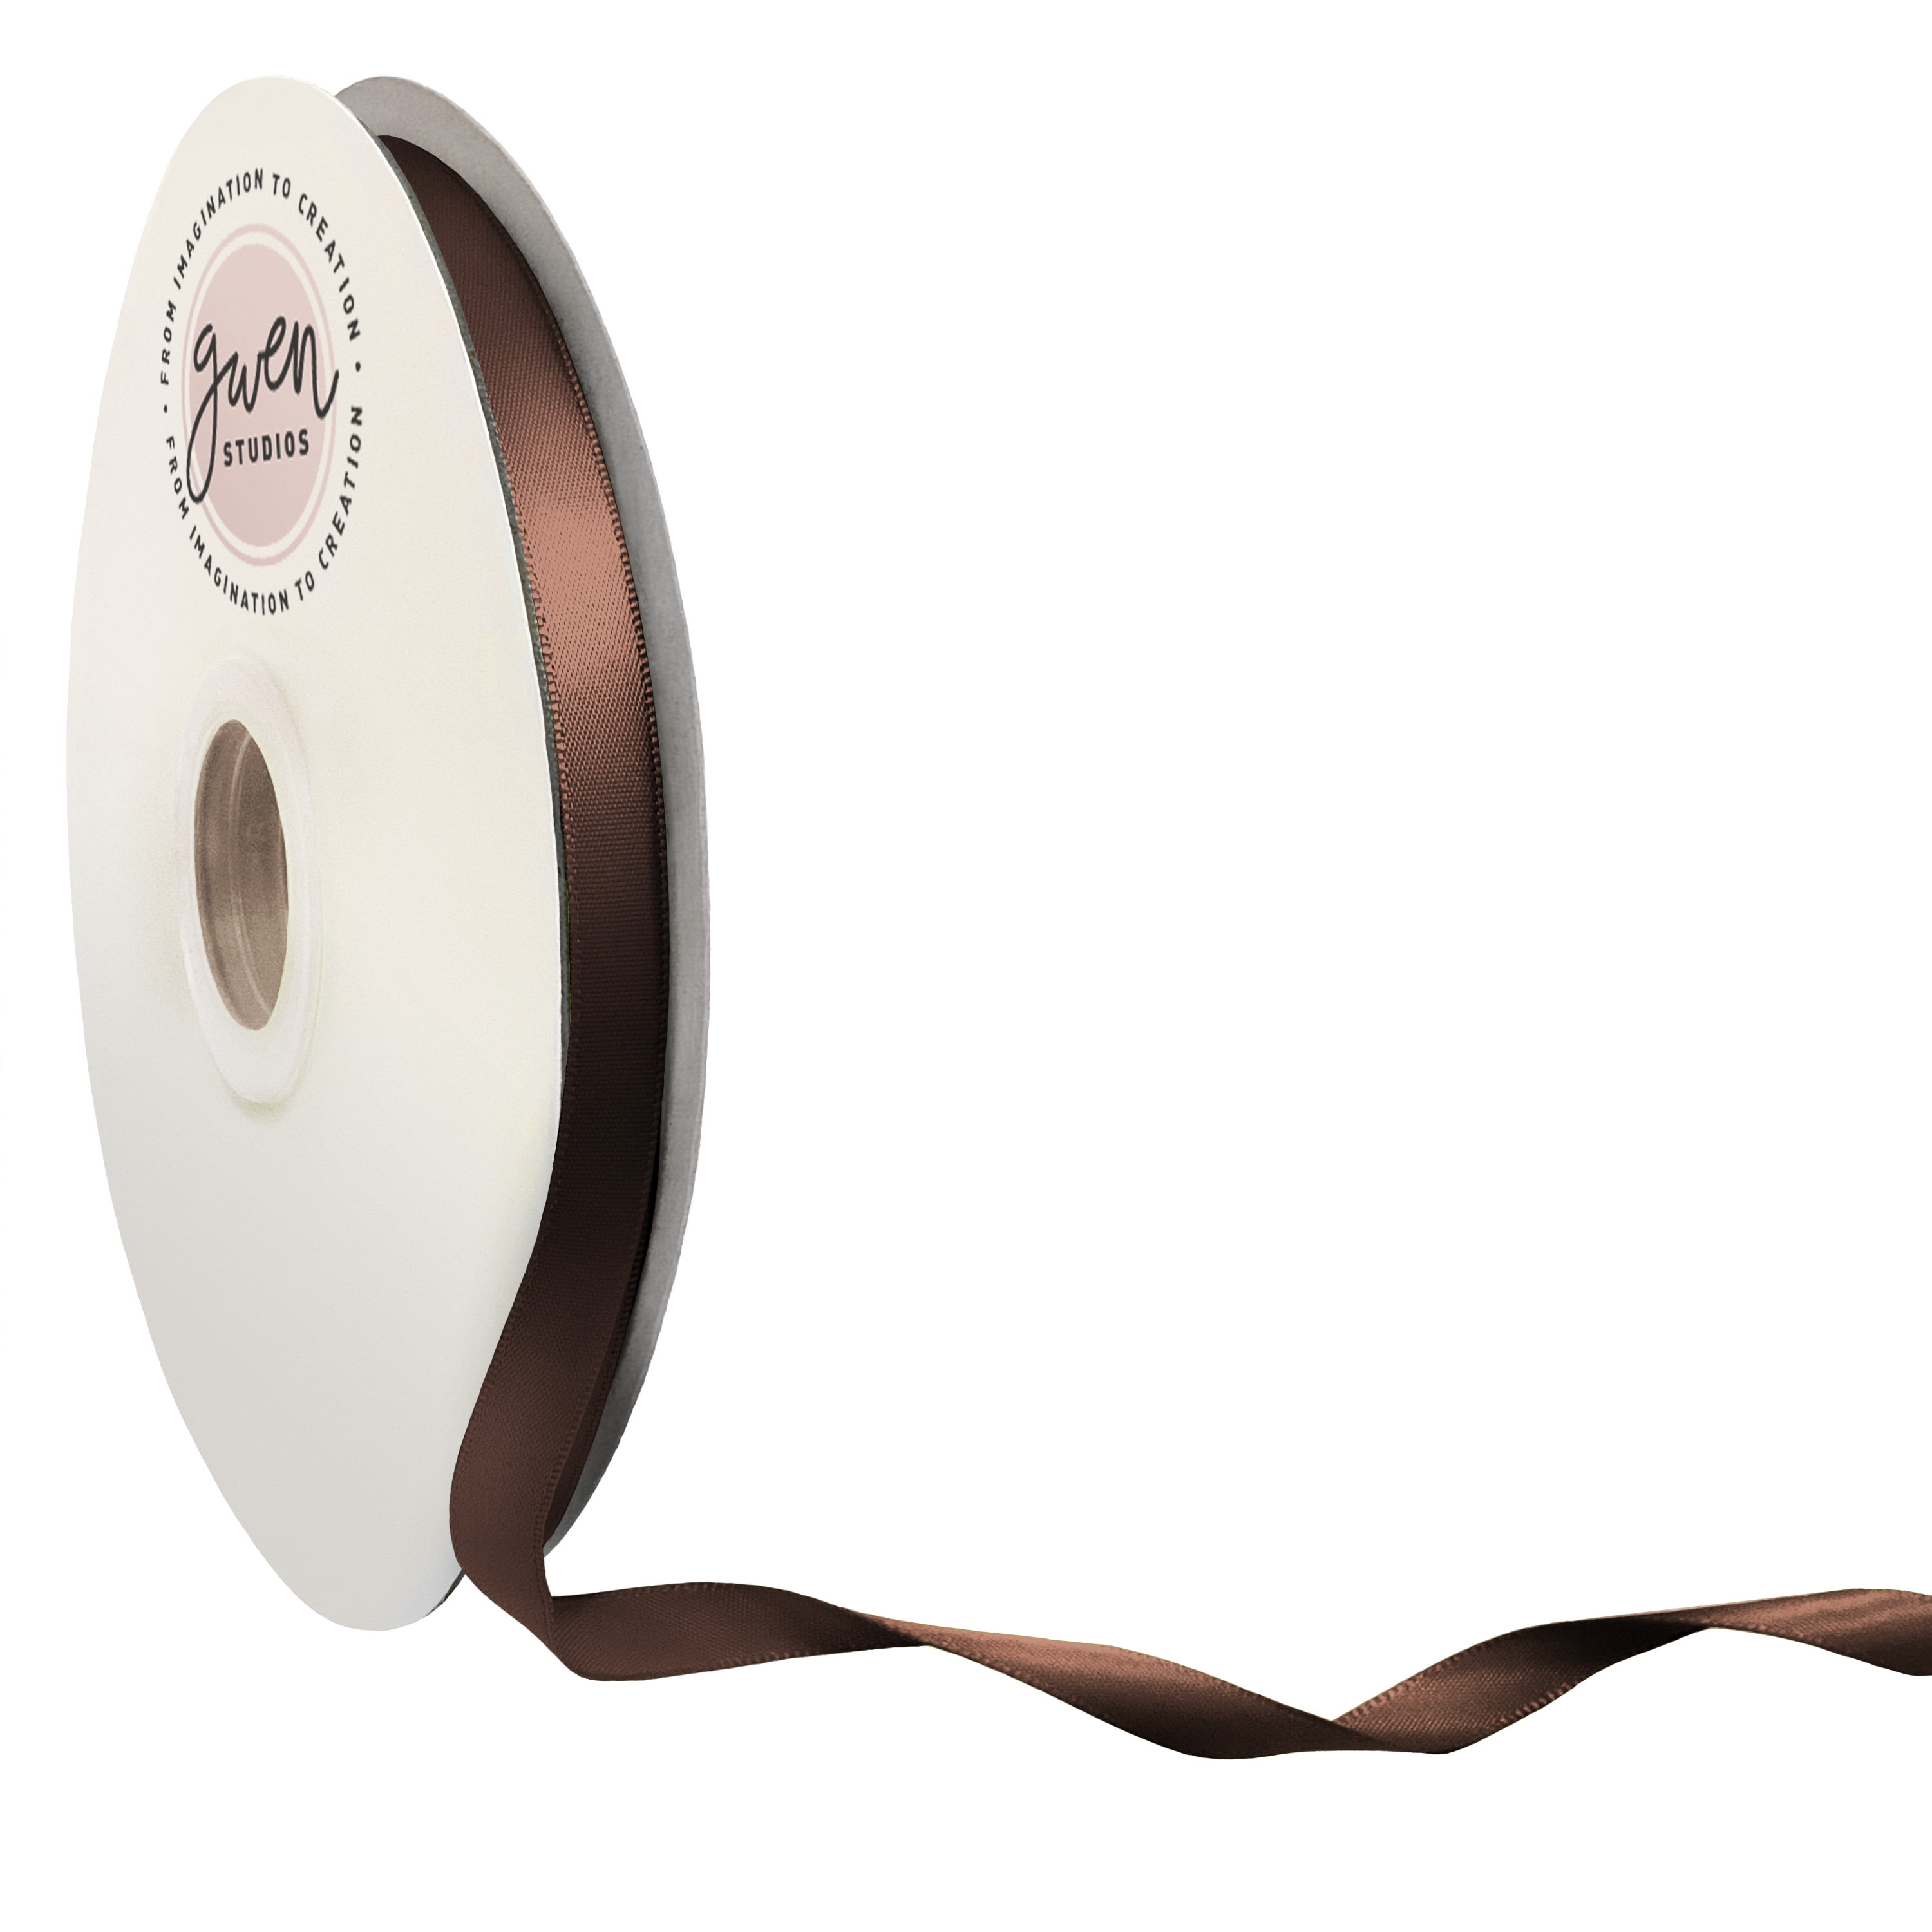 Gwen Studios Double Faced Satin Ribbon in Brown | 7/8 x 100yd | Michaels